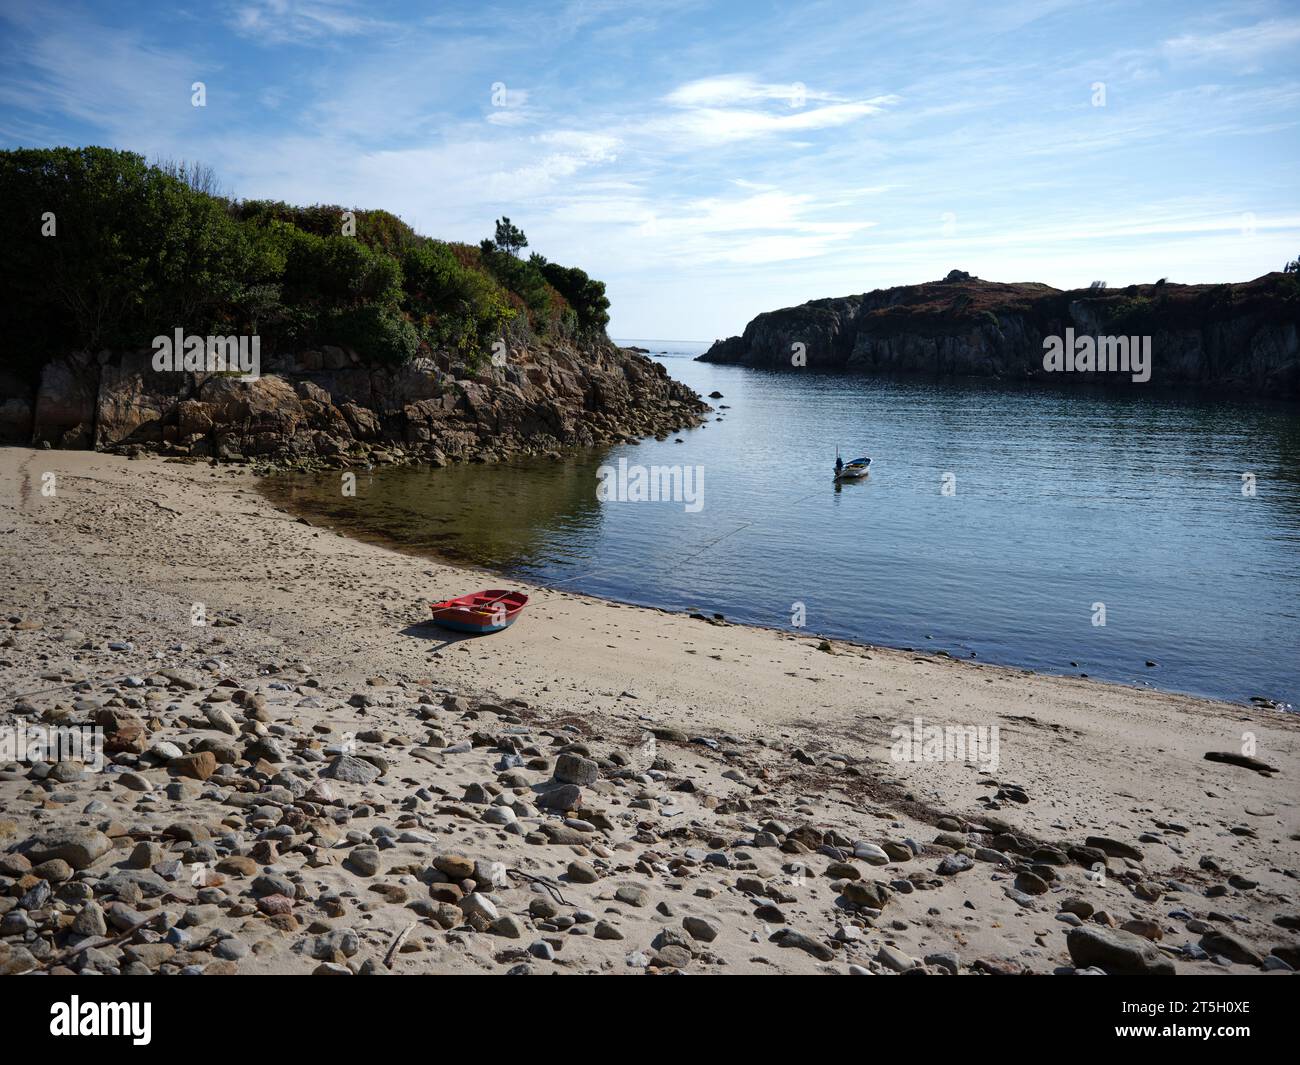 The beach of “Rueta” is a beach located at the mouth of the Xunco river, in the municipality of Cervo, in the province of Lugo, Galicia. Stock Photo